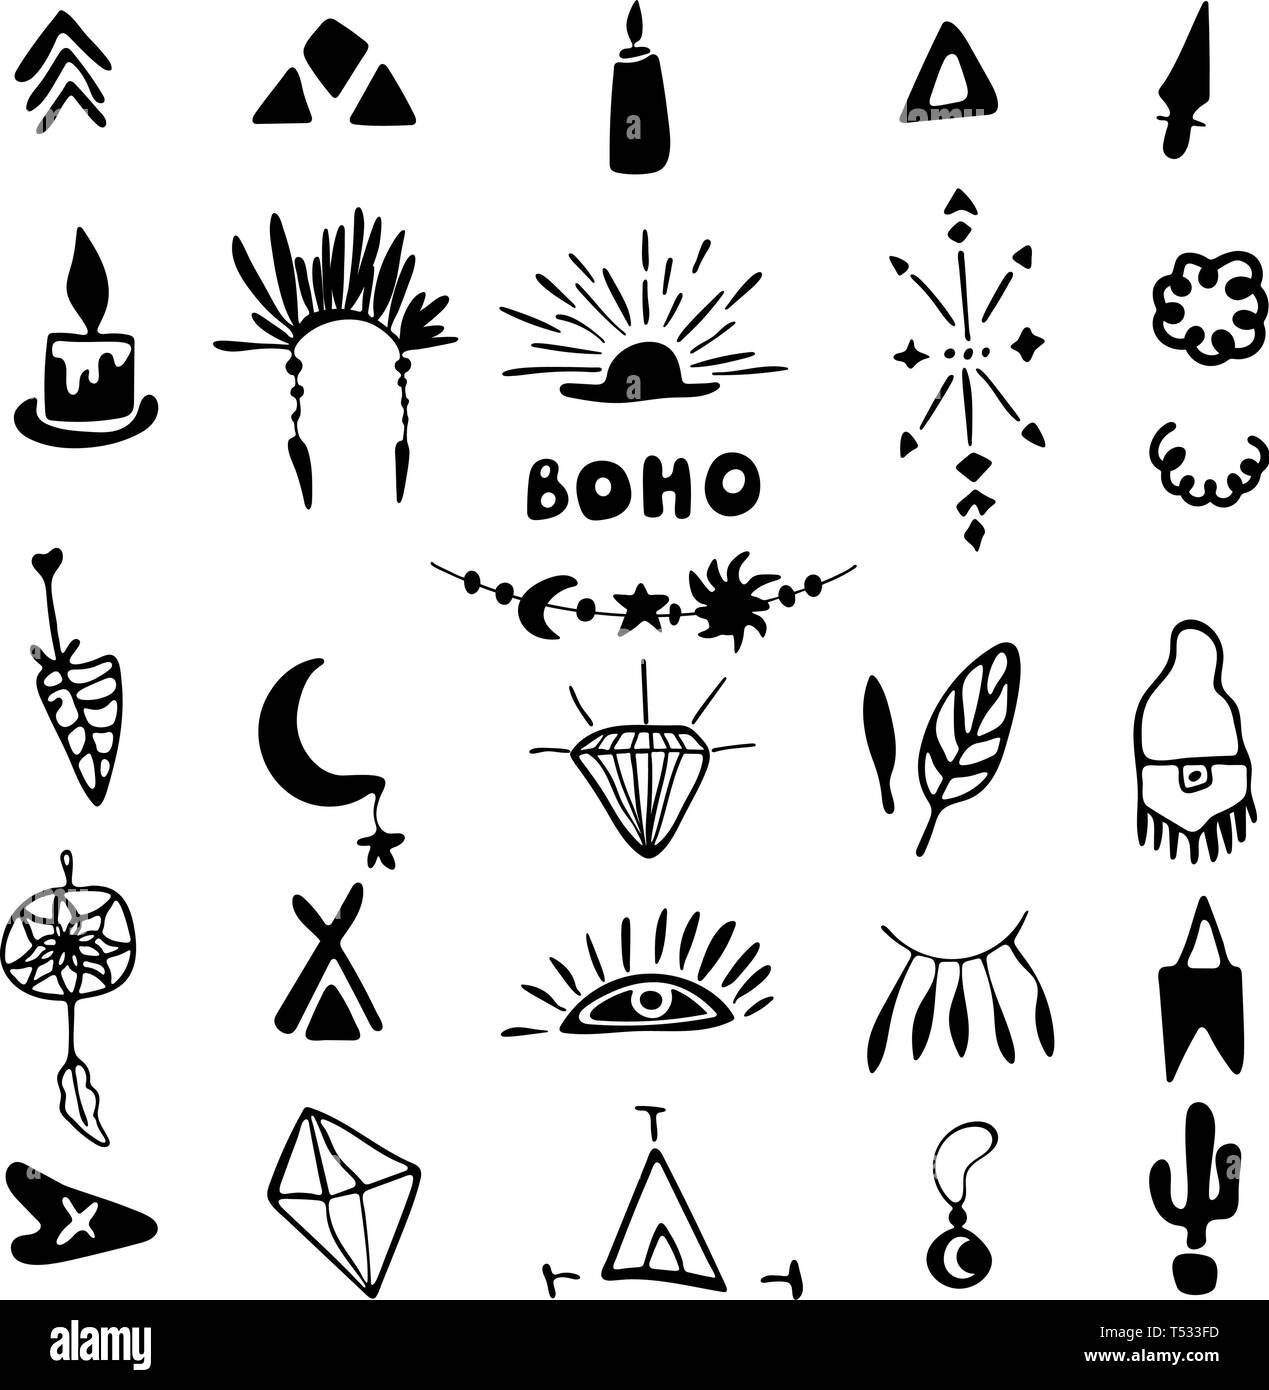 Vector boho decor set, collection of hand-drawn doodle boho style design elements, dream catchers. Isolated. Used for wedding invitations, birthday Stock Vector